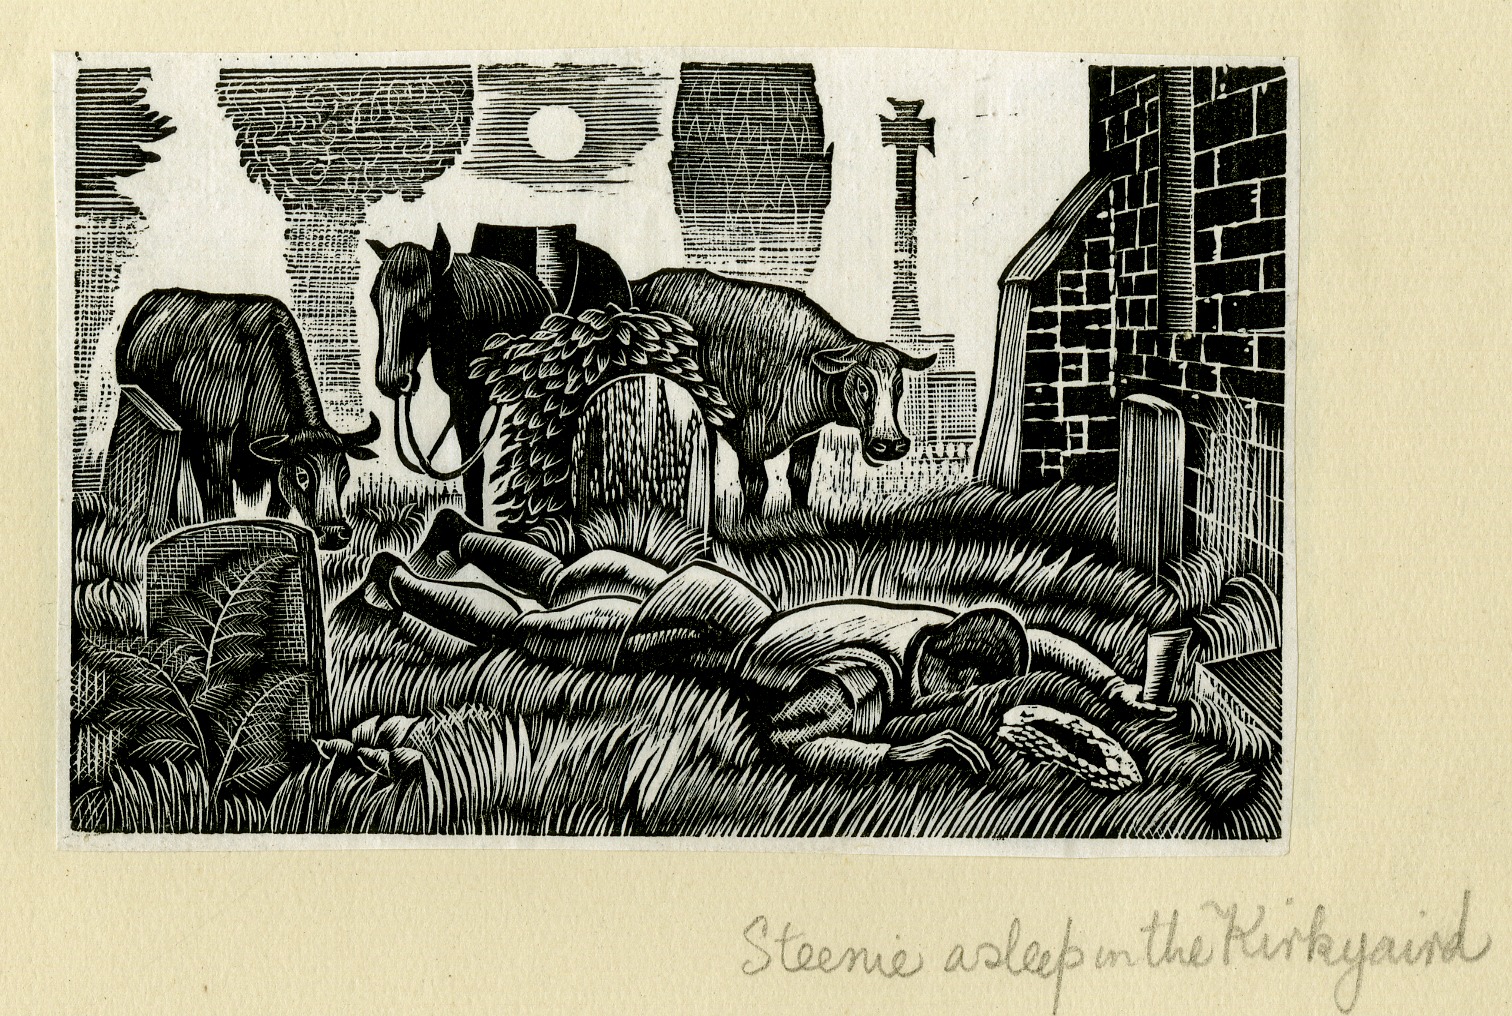 Steenie asleep in the Kirkyaird [sic] (from Album containing complete set of pulls from blocks for 'The Devil in Scotland' by Douglas Percy Bliss) (1934)